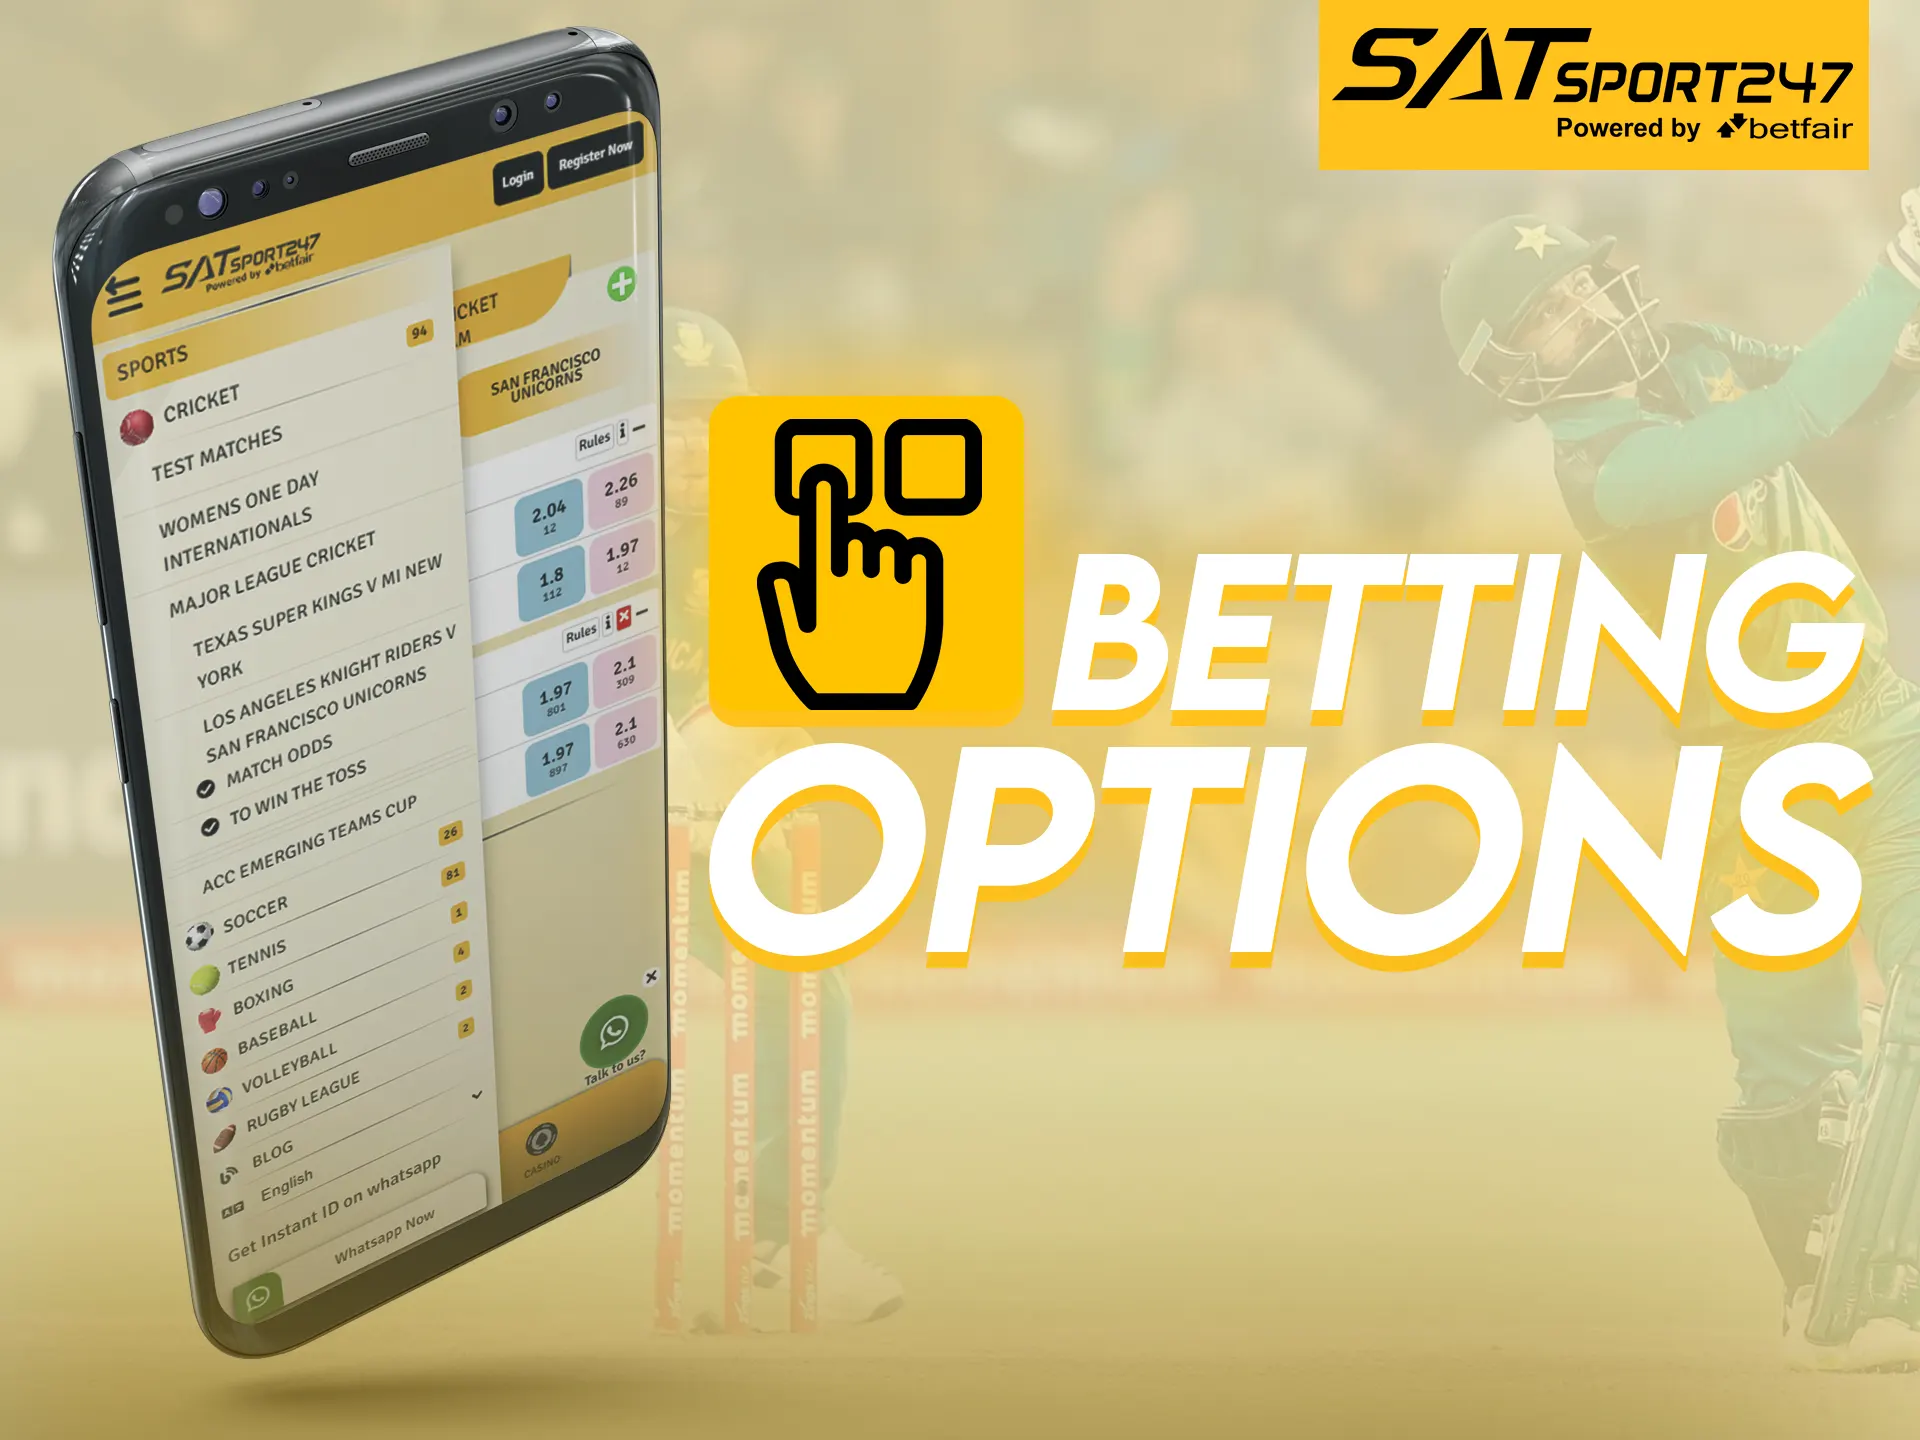 Try all the options for sports betting on the Satsport247 app.